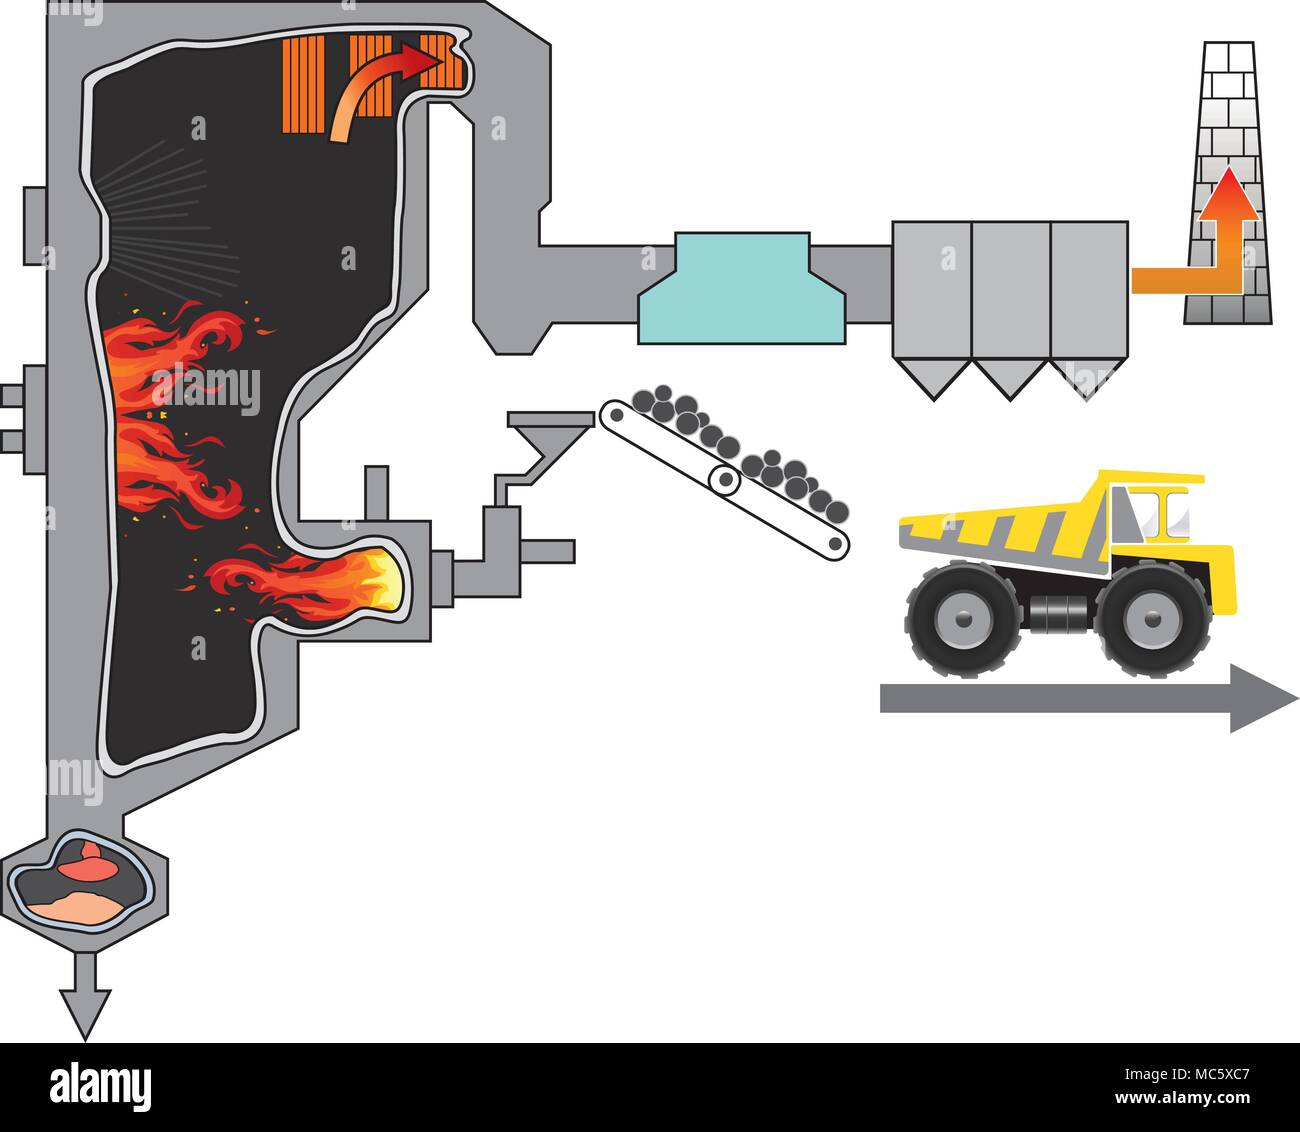 pulverised coal fired boiler is an industrial or utility boiler that generates thermal energy by burning pulverised coal that is blown into the firebo Stock Vector